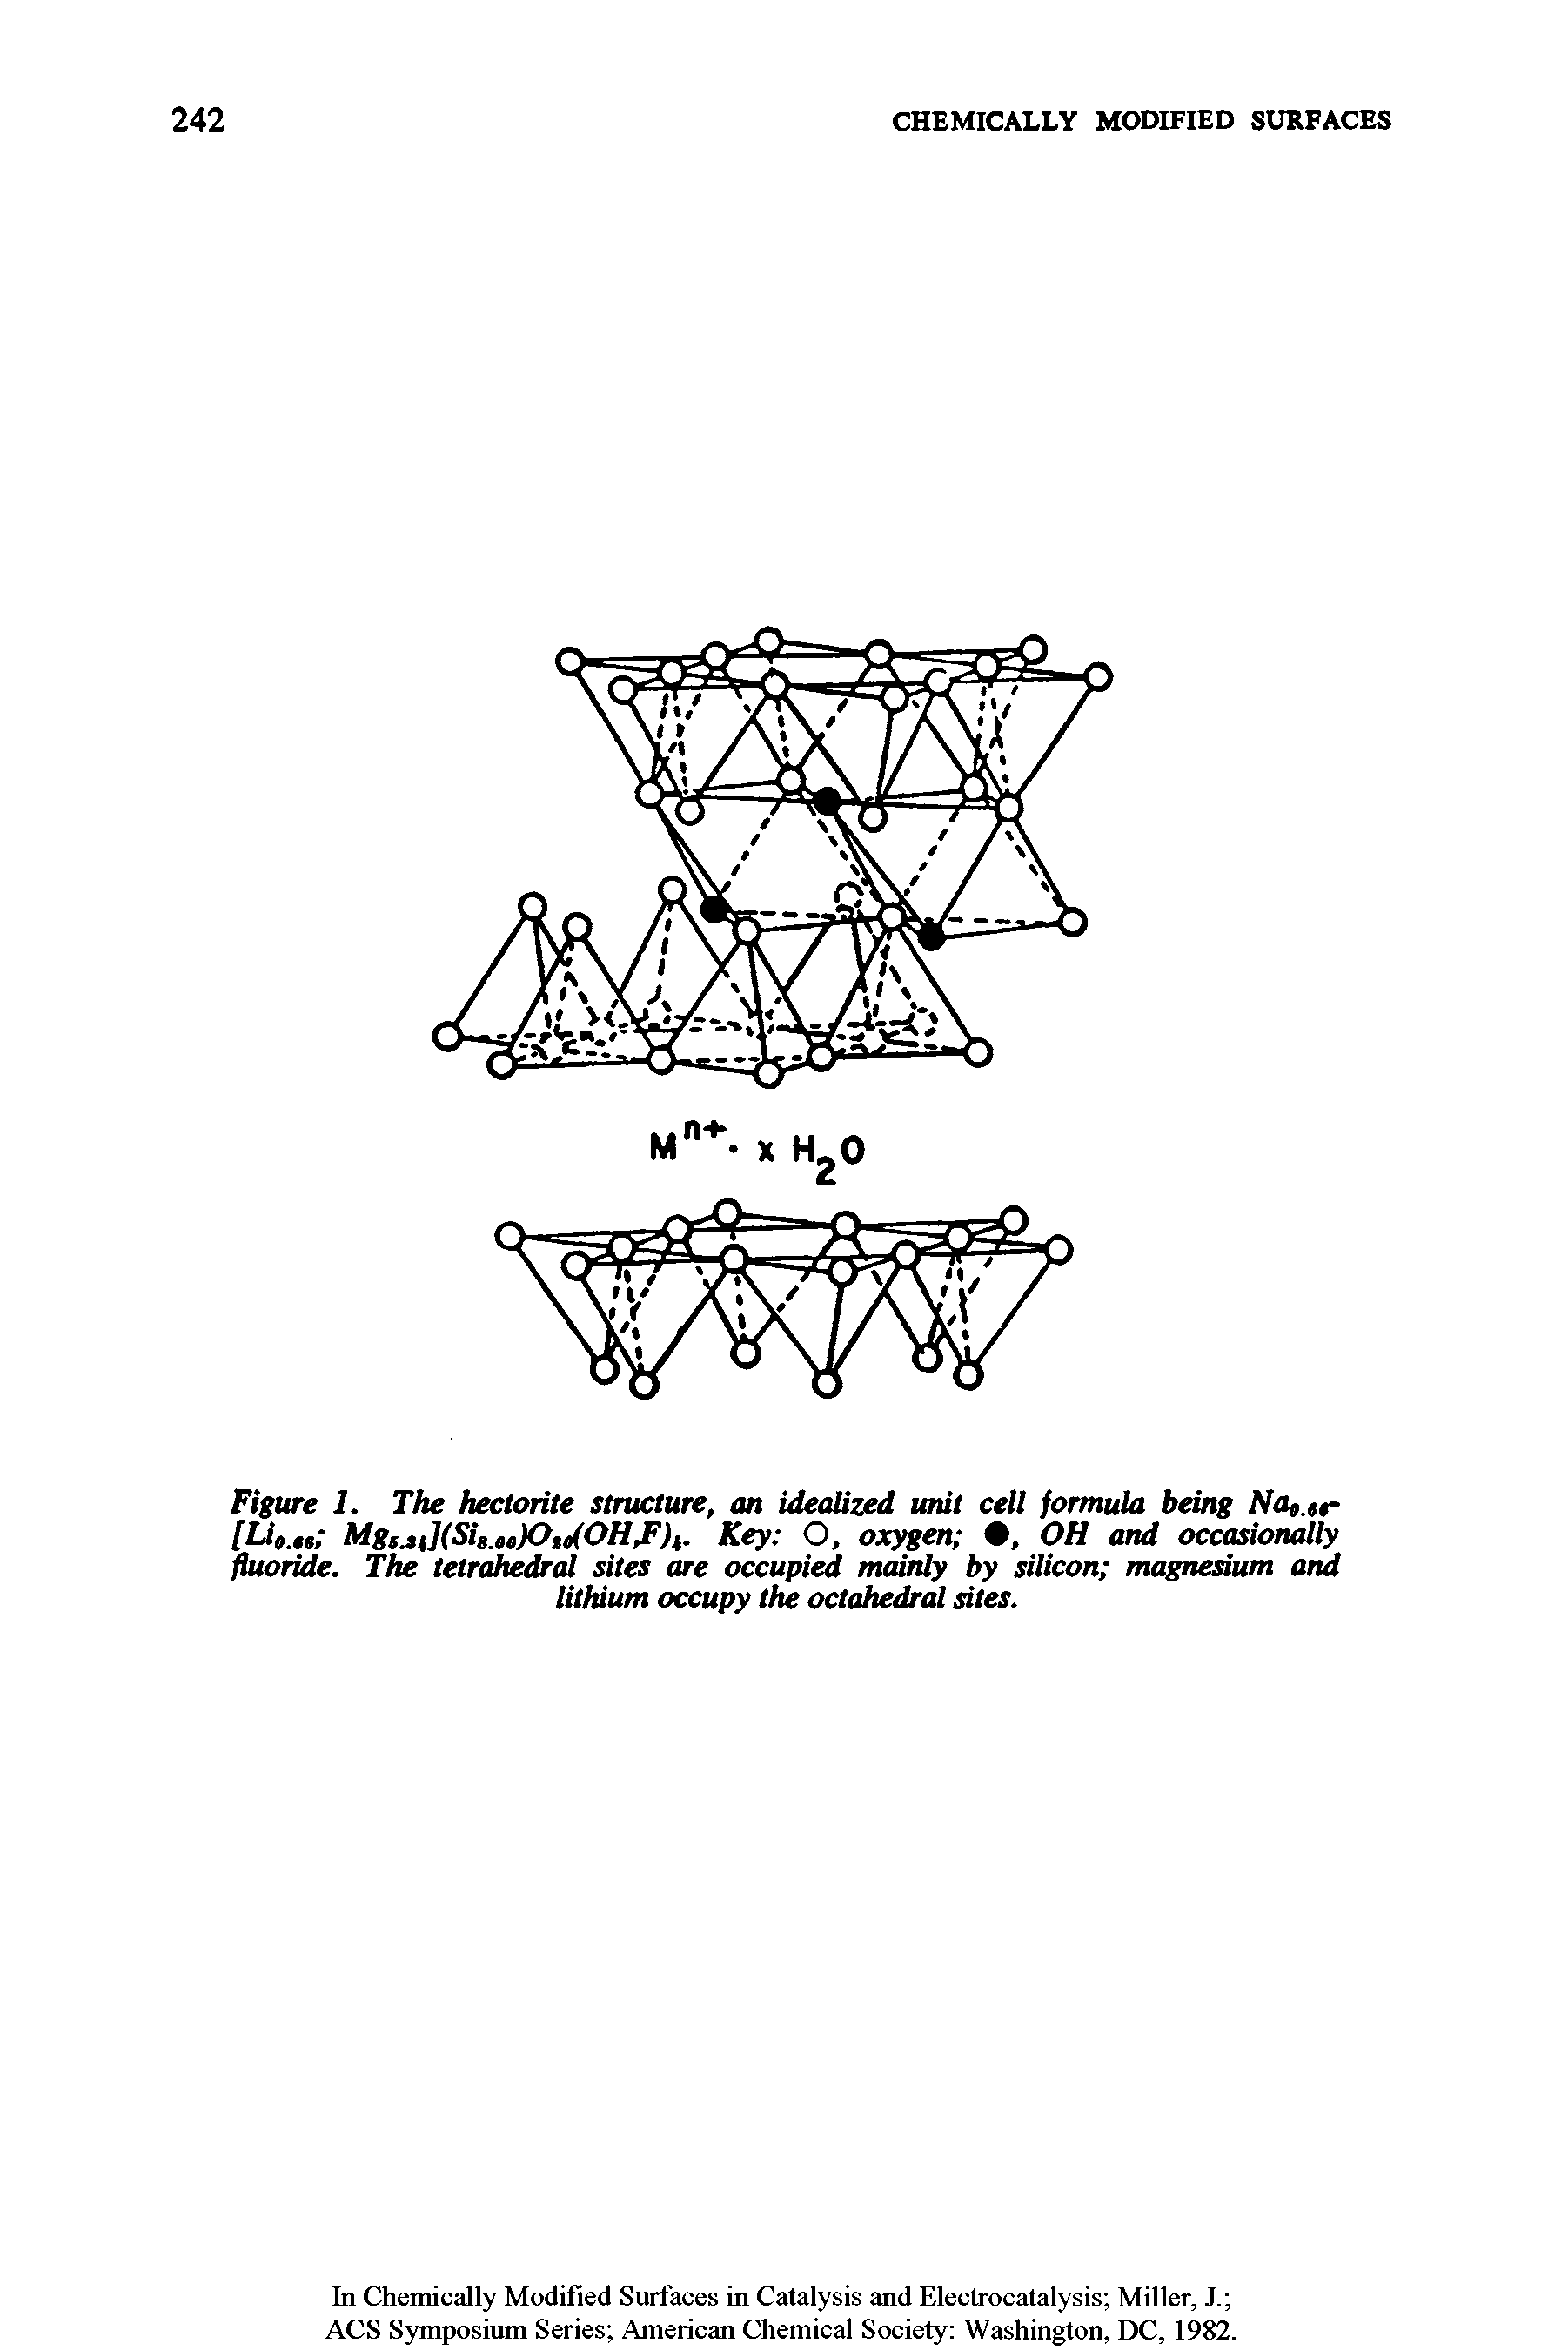 Figure 1. The hectorite structure, an idealized, unit cell formula being Na0.tr [Lit., Mg,.st](Sig. )0,c(0H,F)t. Key O, oxygen , OH and occasionally fluoride. The tetrahedral sites are occupied mainly by silicon magnesium and lithium occupy the octahedral sites.